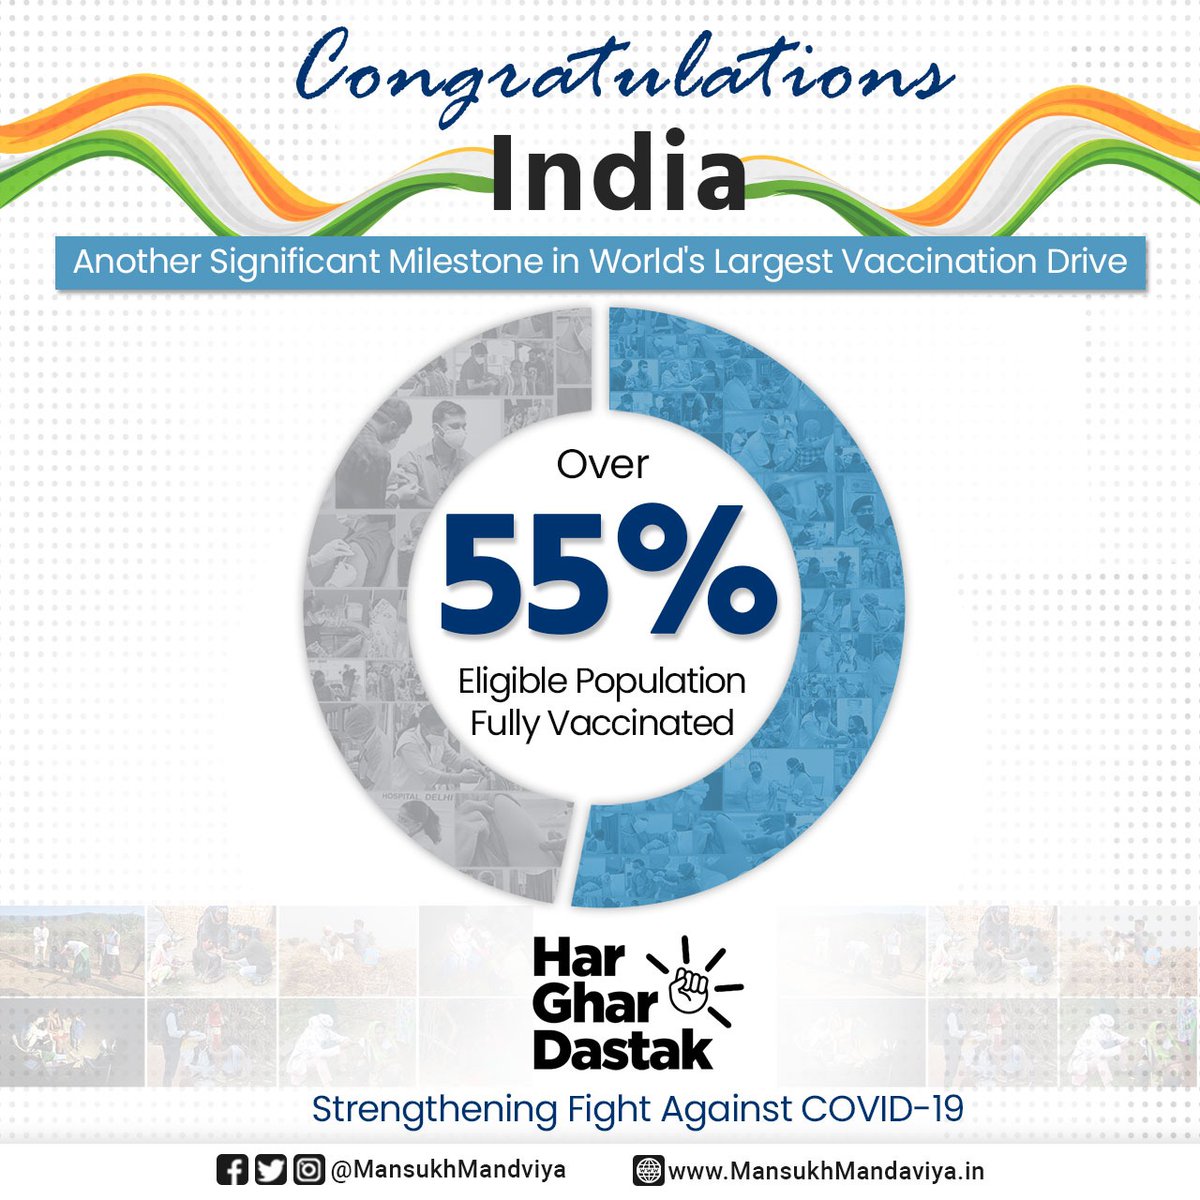 सतत प्रयास, अथक प्रयास 

With over 55% of the eligible population fully vaccinated now, 🇮🇳 has achieved another milestone in its fight against #COVID19 💉

PM @NarendraModi Ji's #HarGharDastak campaign has further strengthened the nation's collective fight against #COVID19.